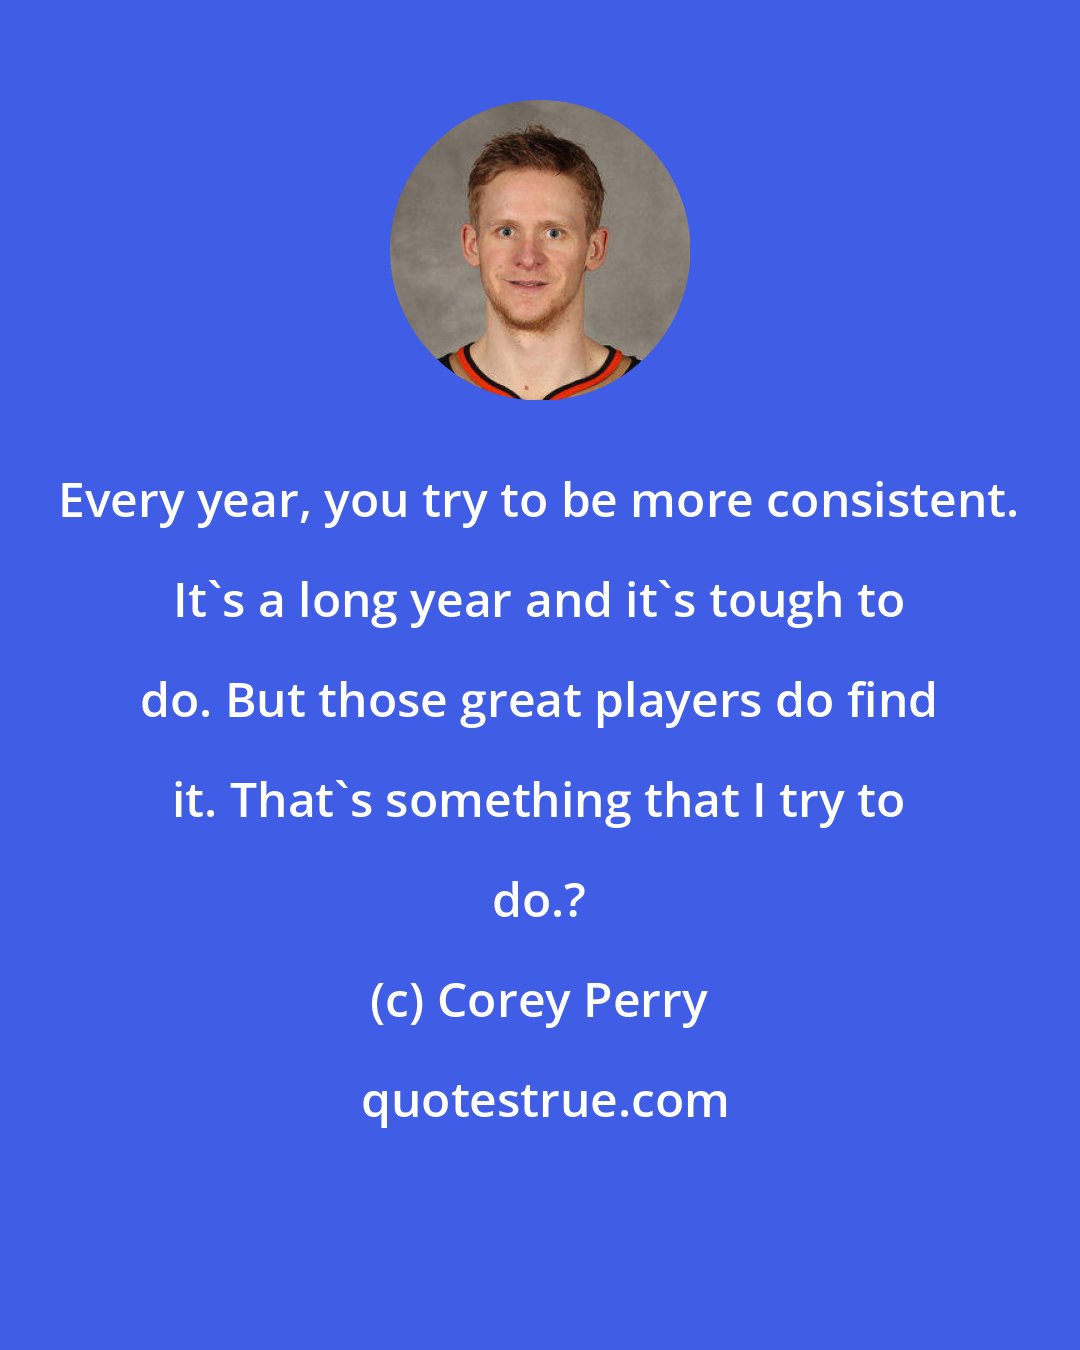 Corey Perry: Every year, you try to be more consistent. It's a long year and it's tough to do. But those great players do find it. That's something that I try to do.?